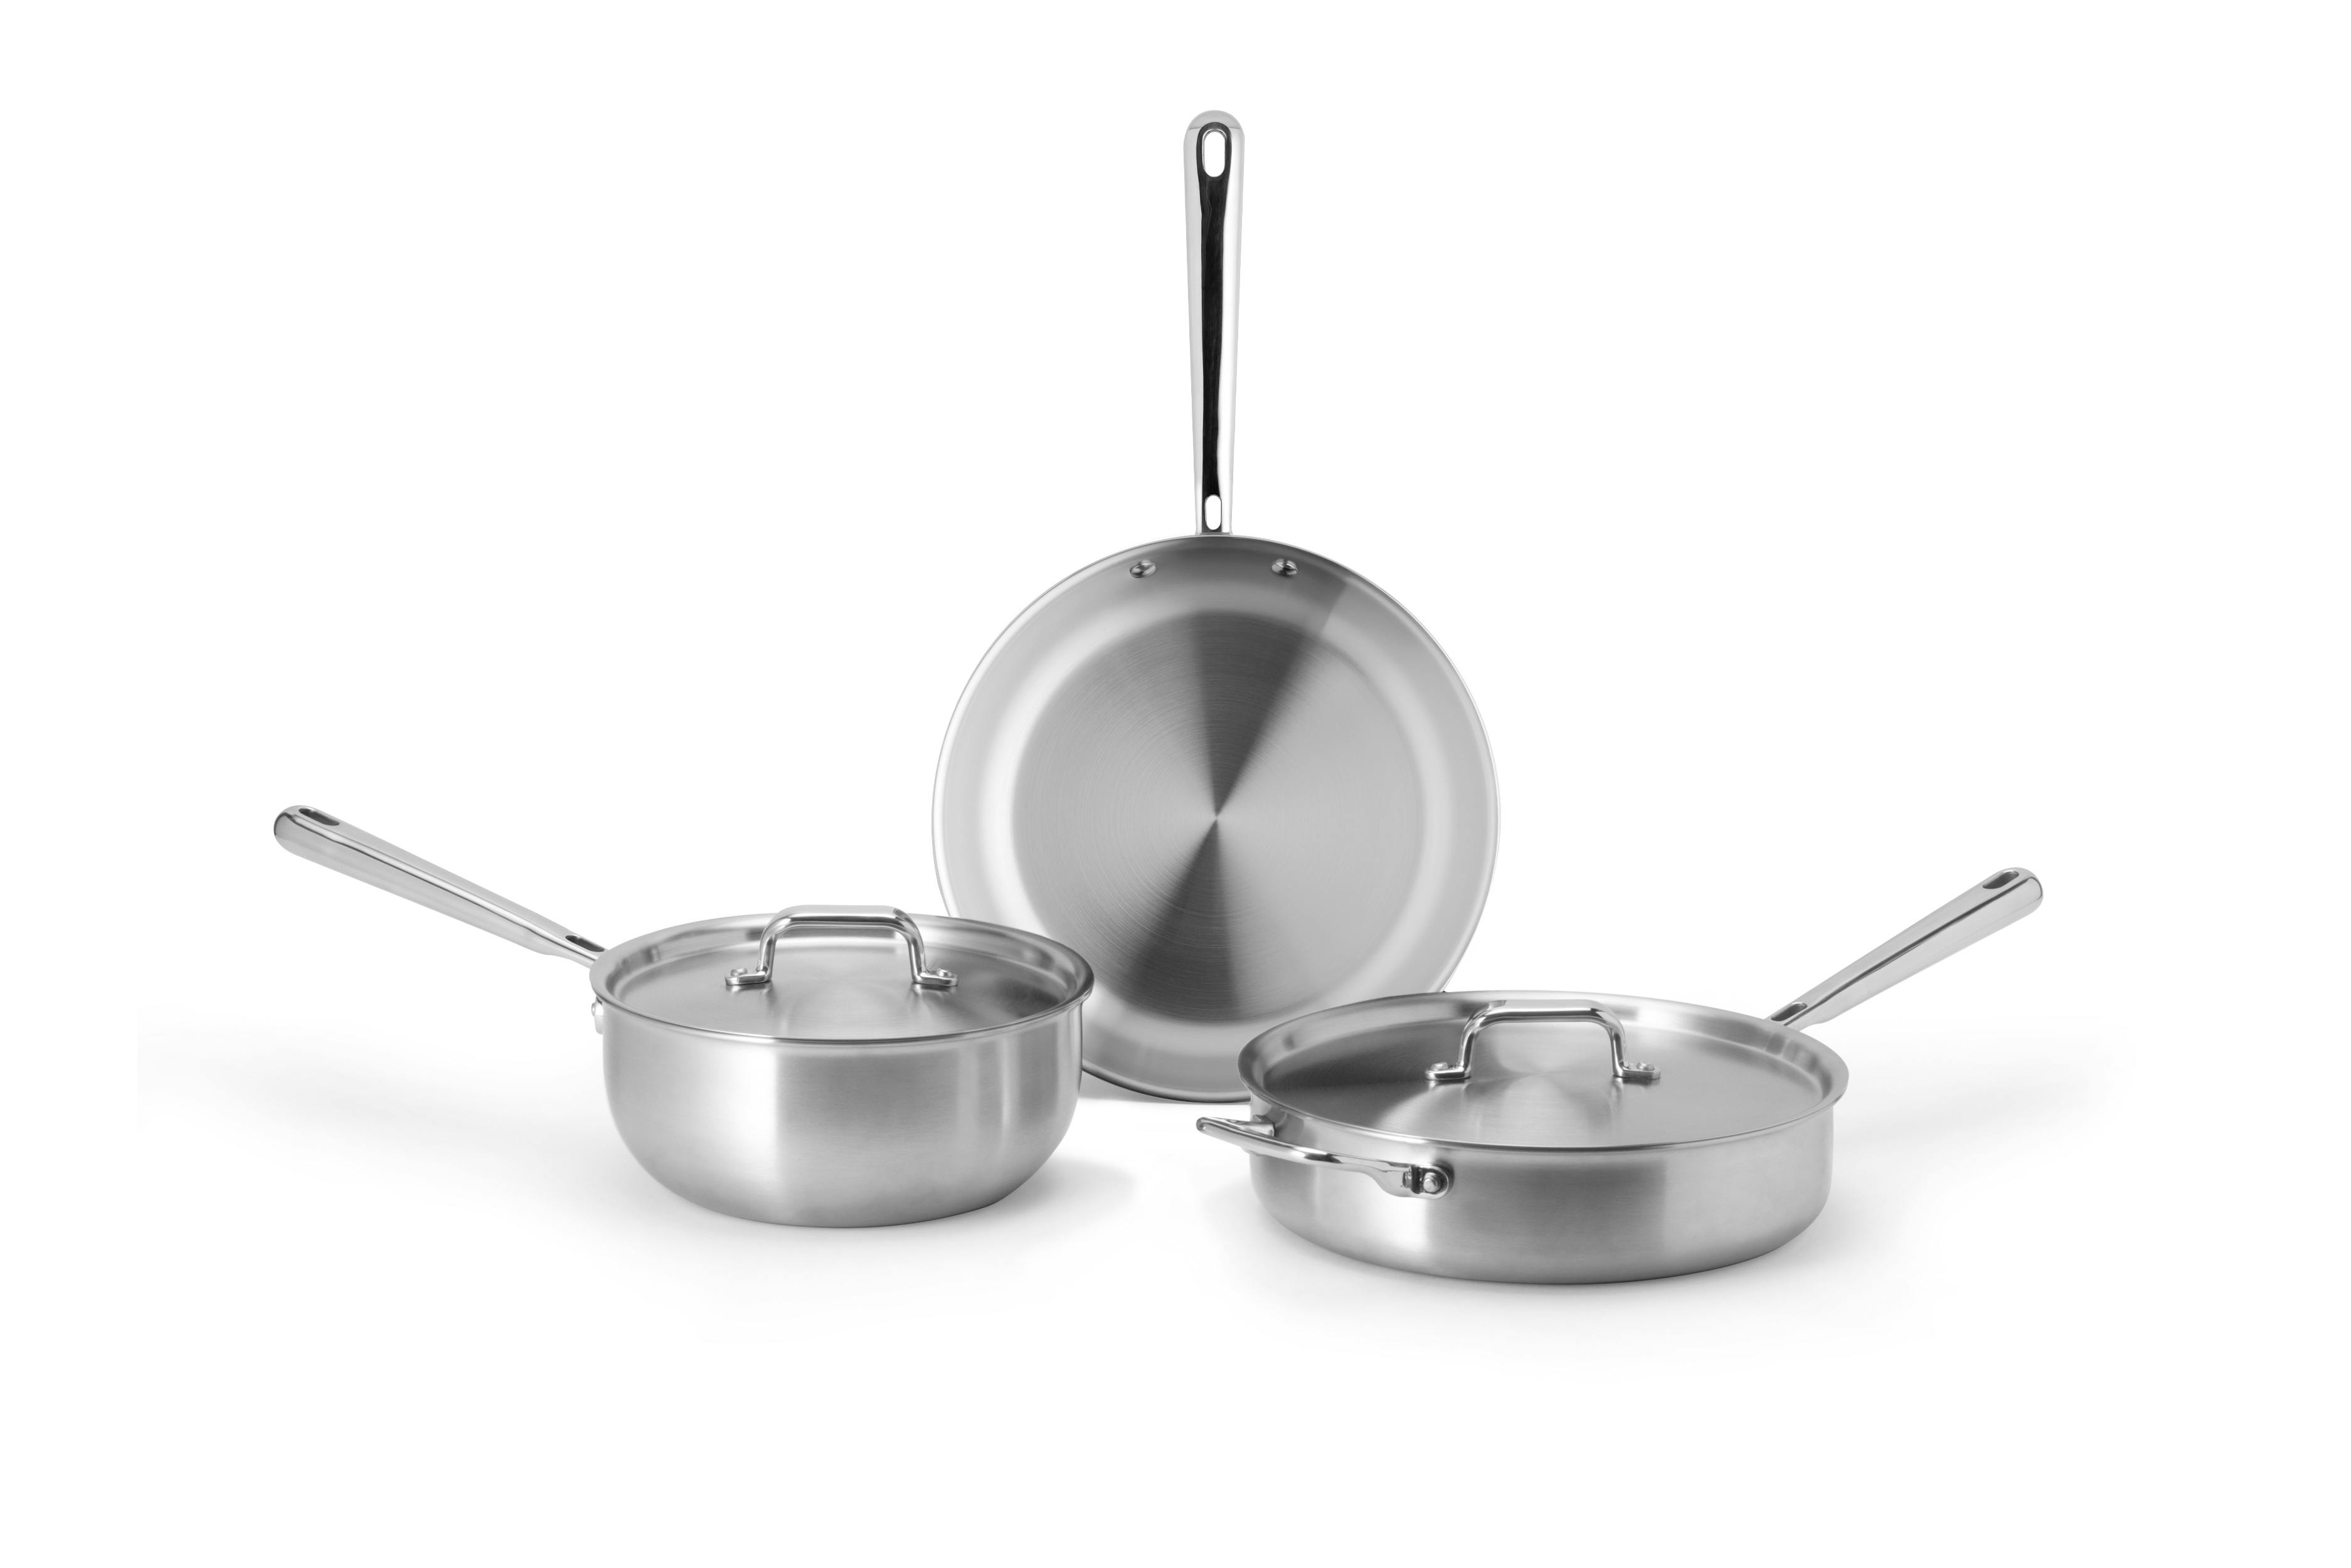  Misen 3 QT Stainless Steel Saucier Pan with Lid - 5